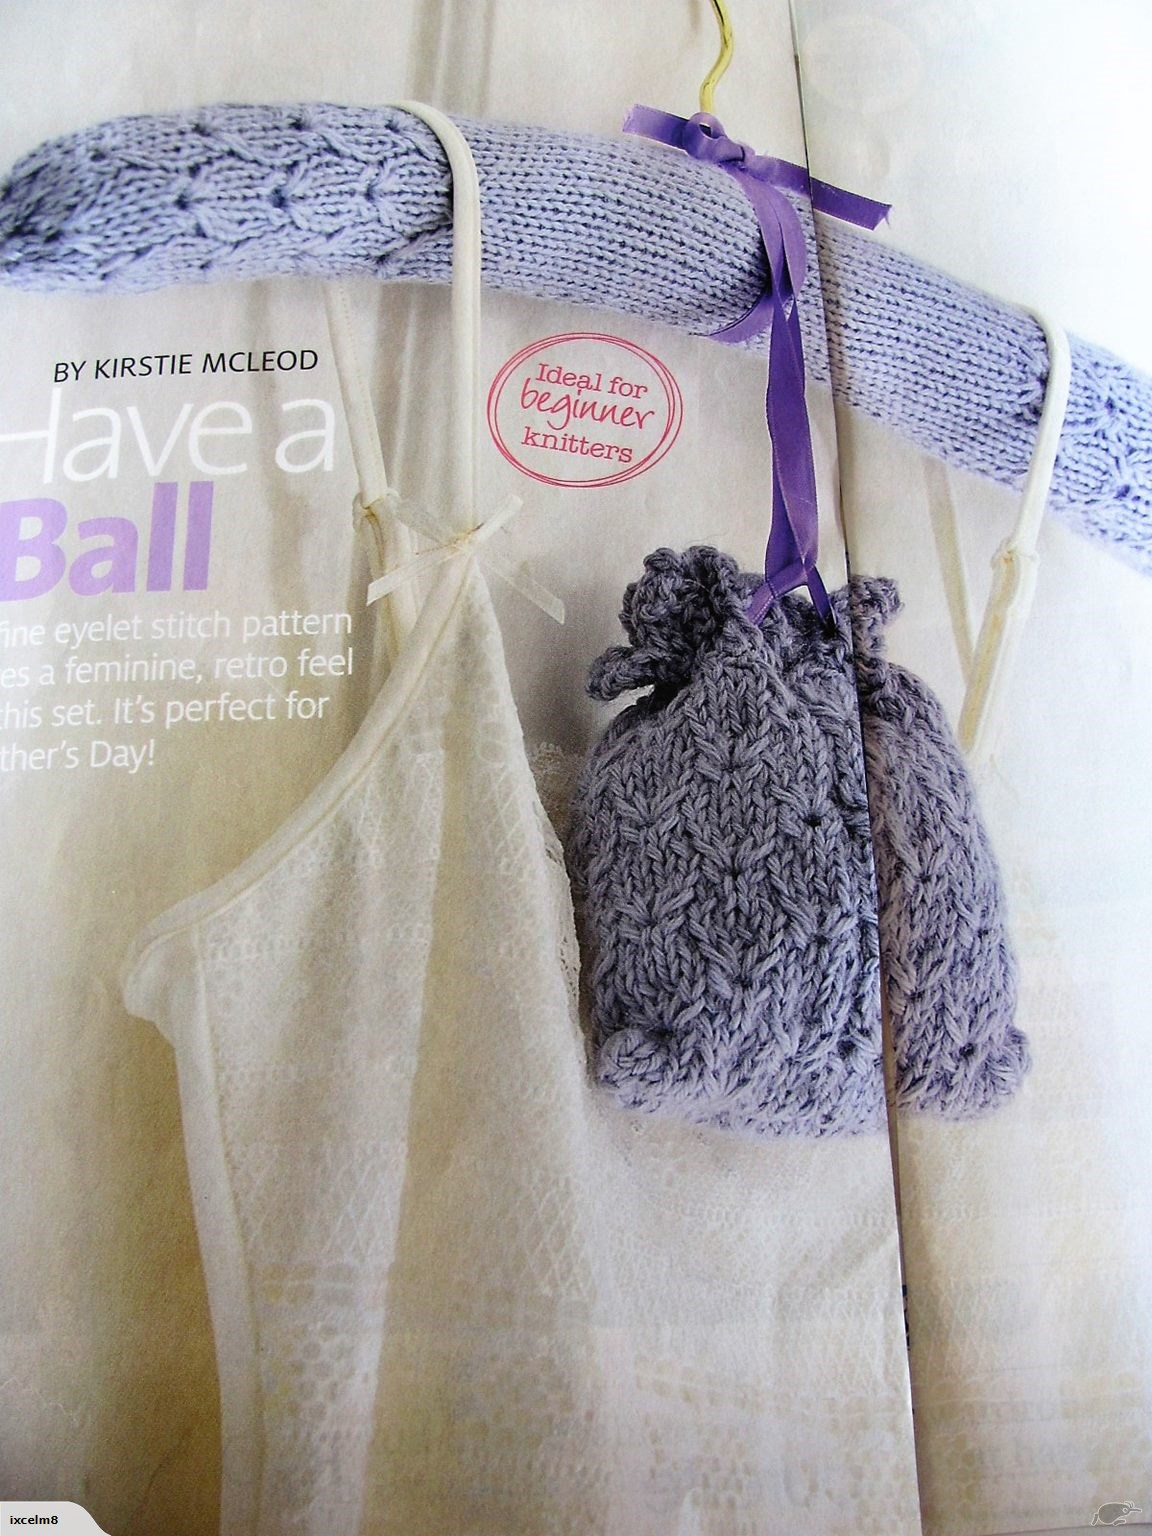 Knitted Sachet Pattern Knit Have A Ball Eyelet Stitch Hanger Cover Sachet Set For You To Knit